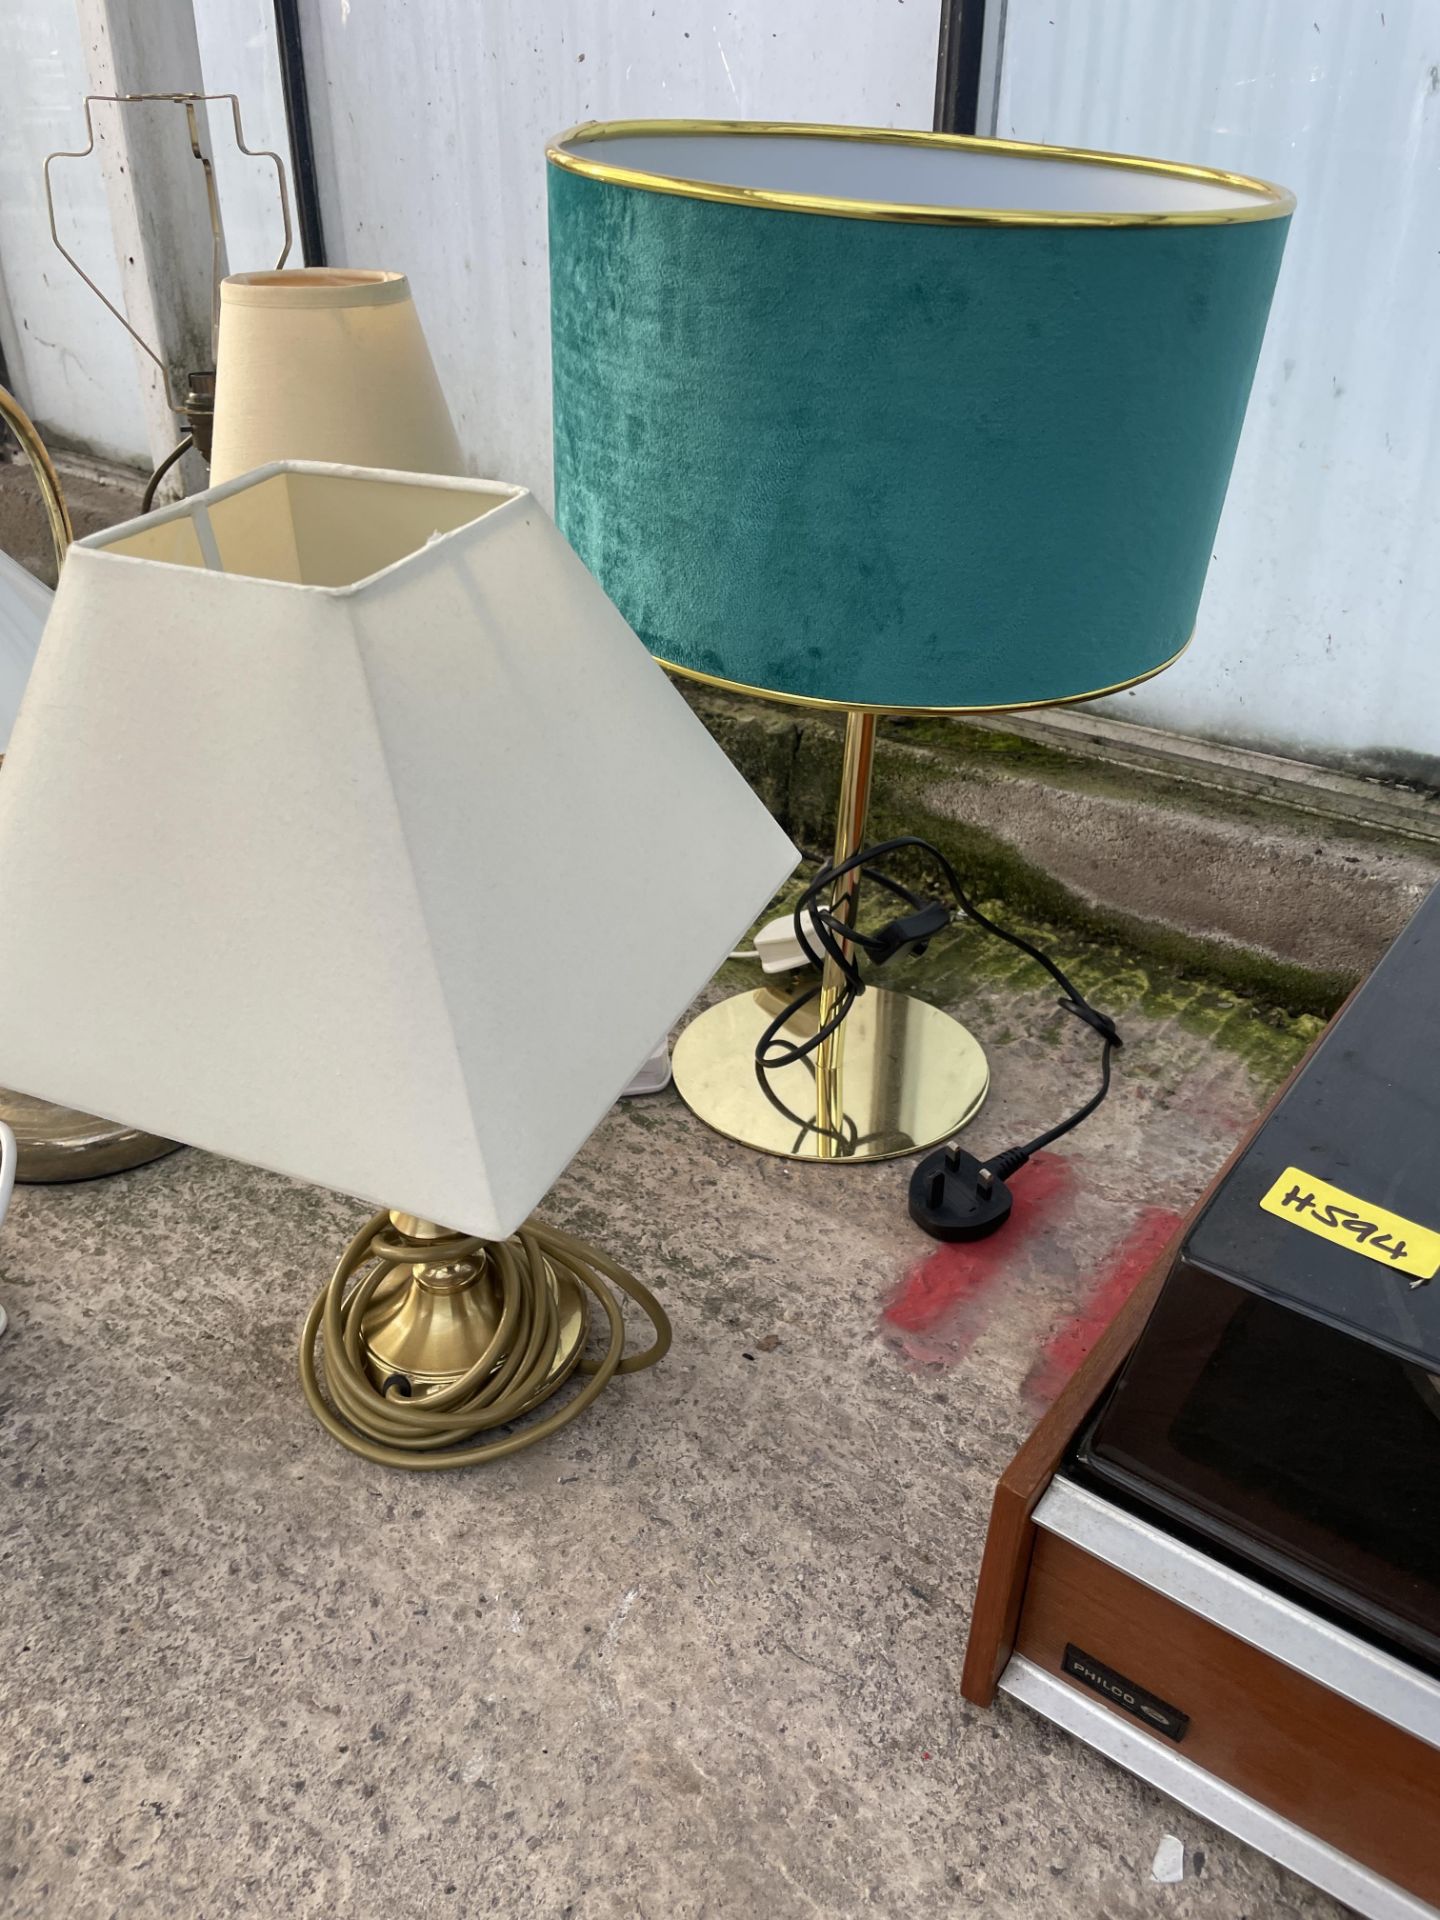 AN ASSORTMENT OF TABLE LAMPS AND A FAN - Image 2 of 2